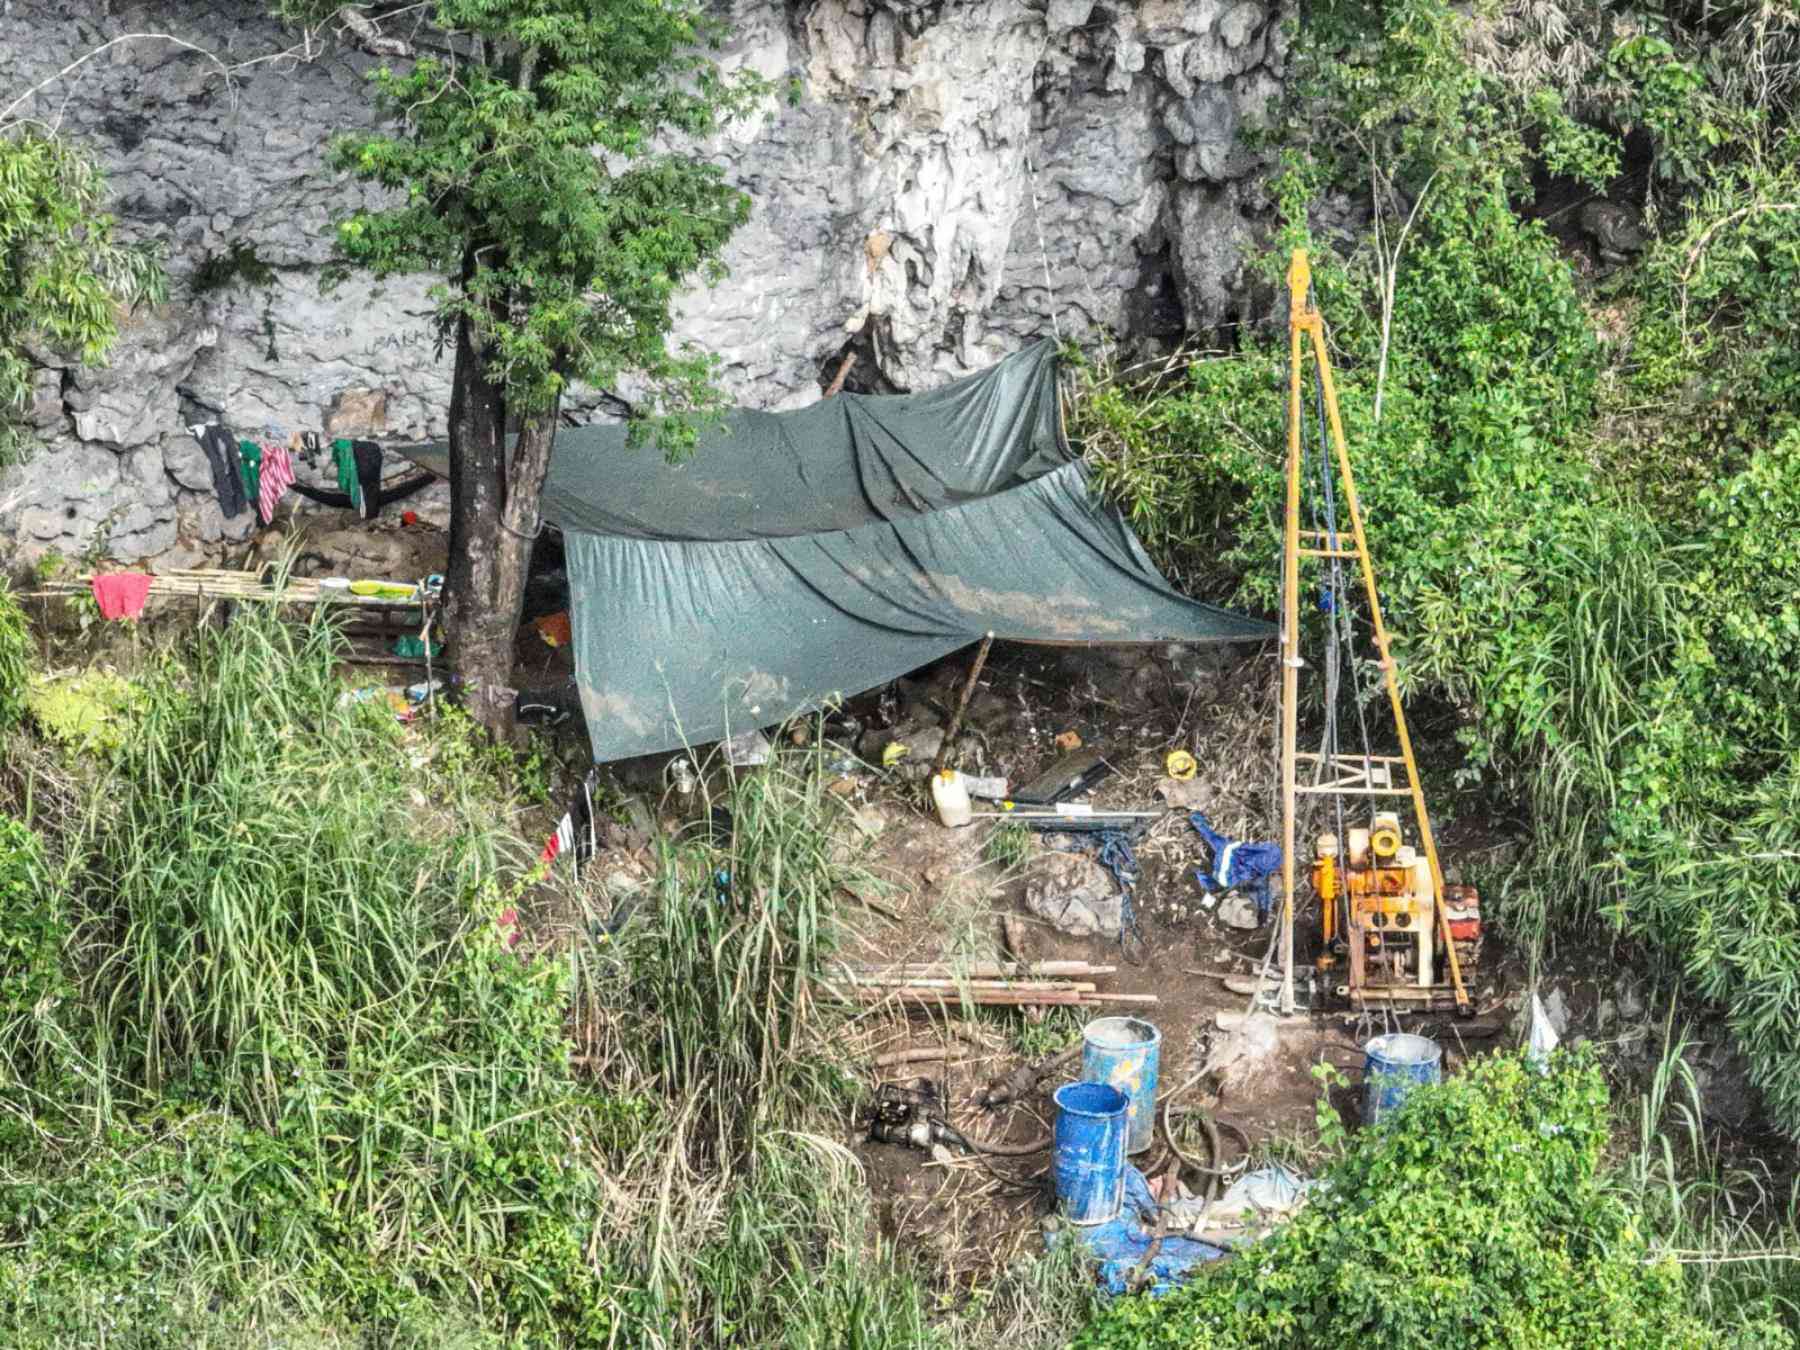 LOOK: Masungi Georeserve uncovers drilling operations in its limestone formations